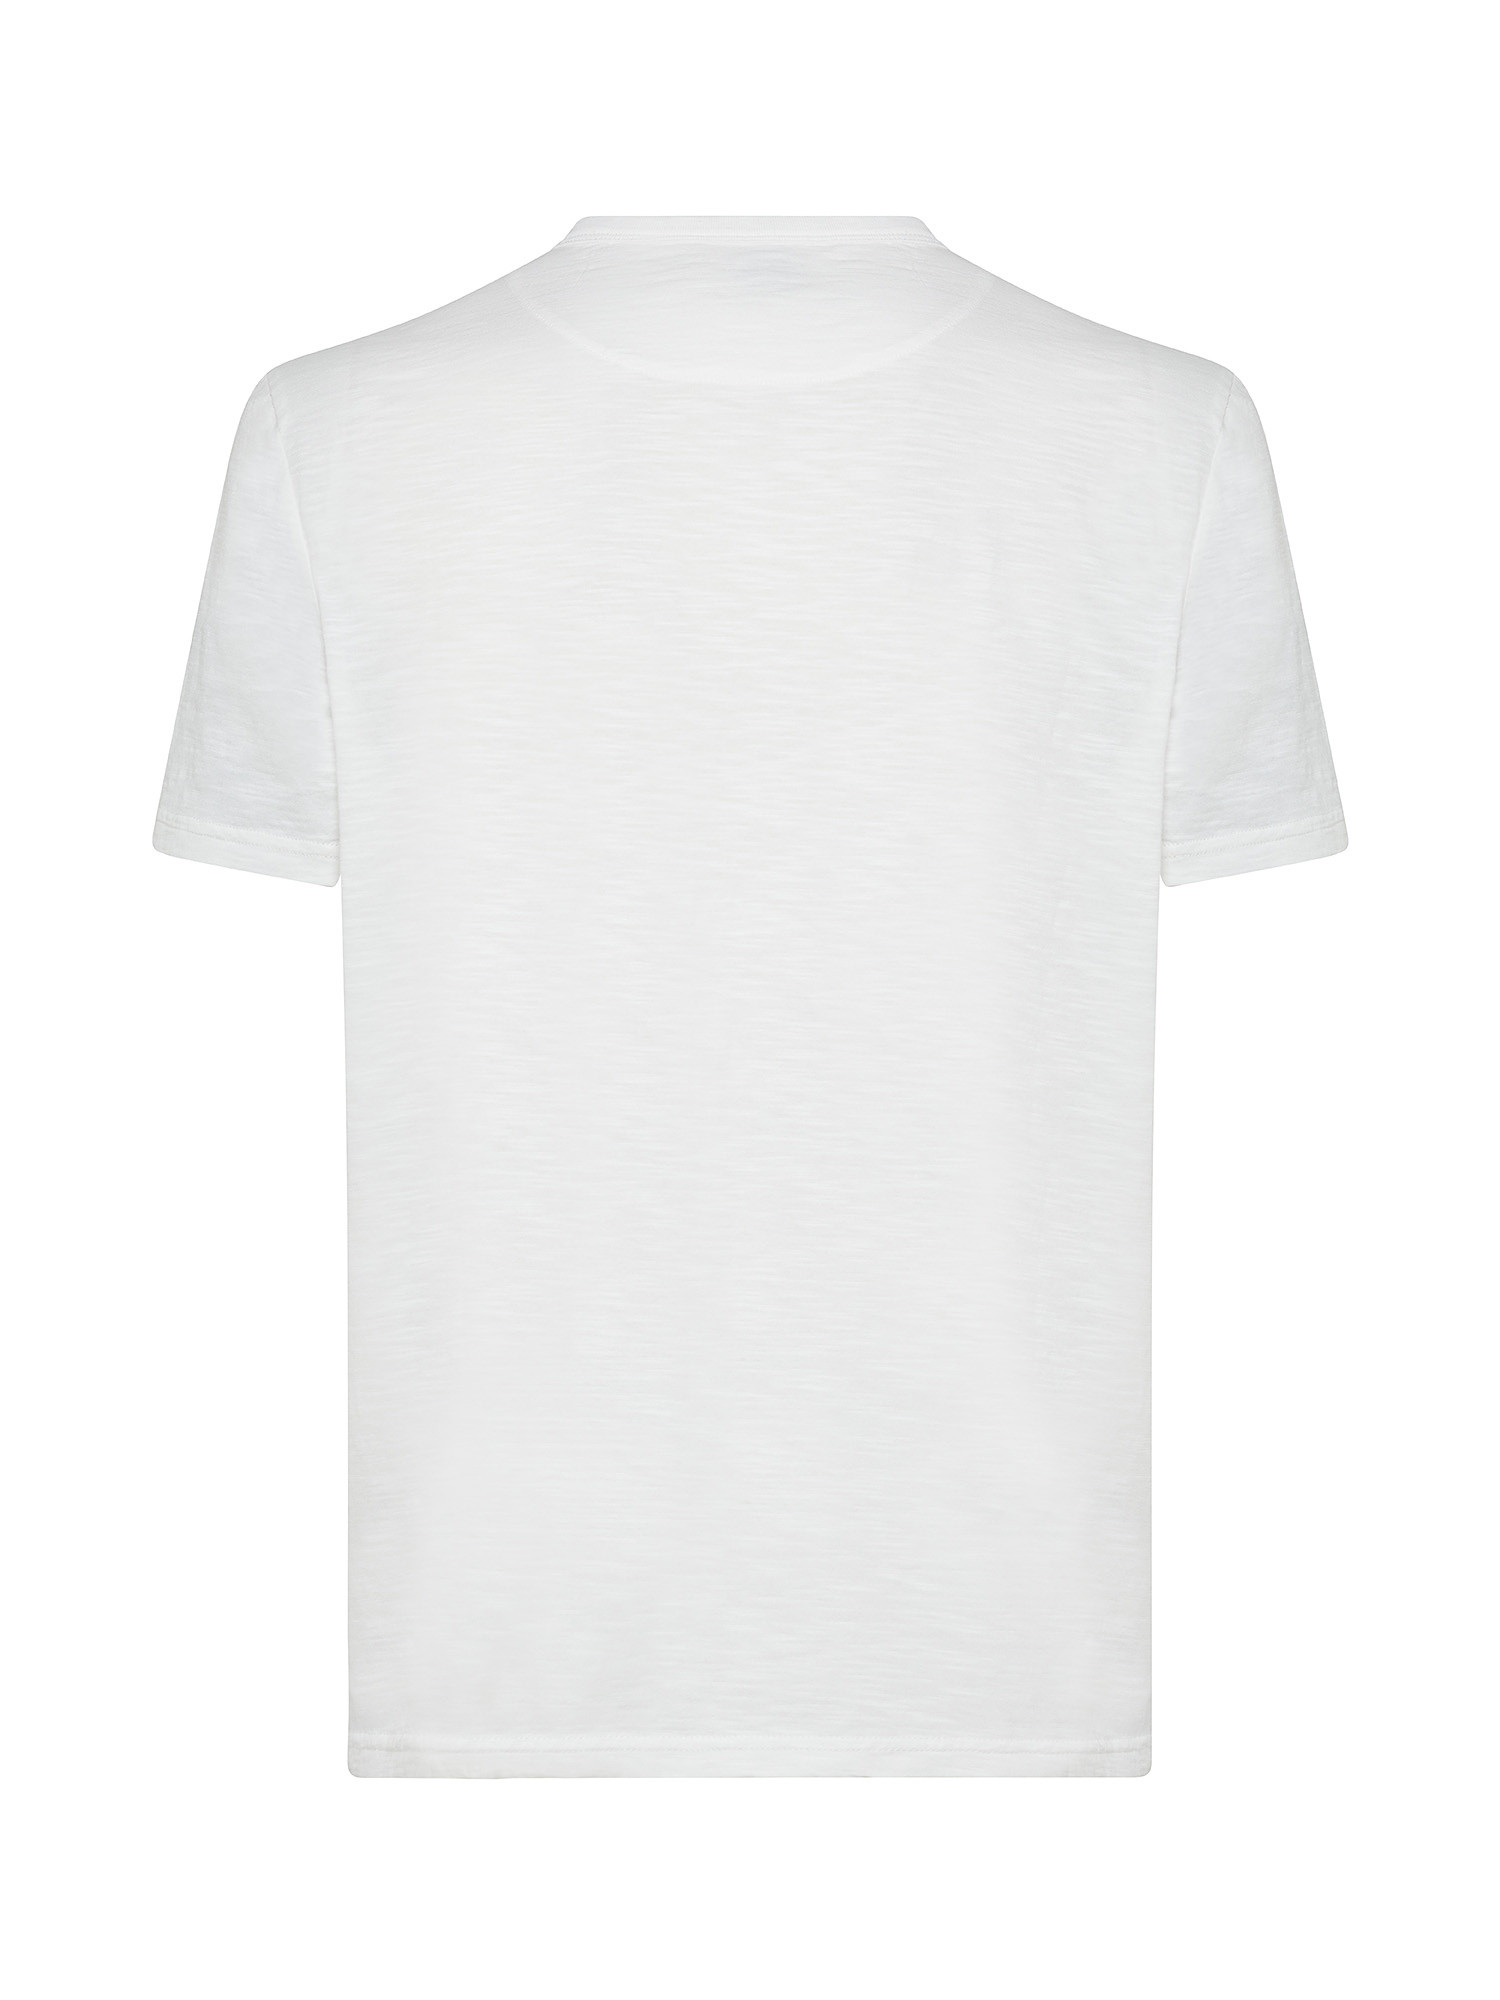 JCT - Pure cotton T-shirt, White, large image number 1